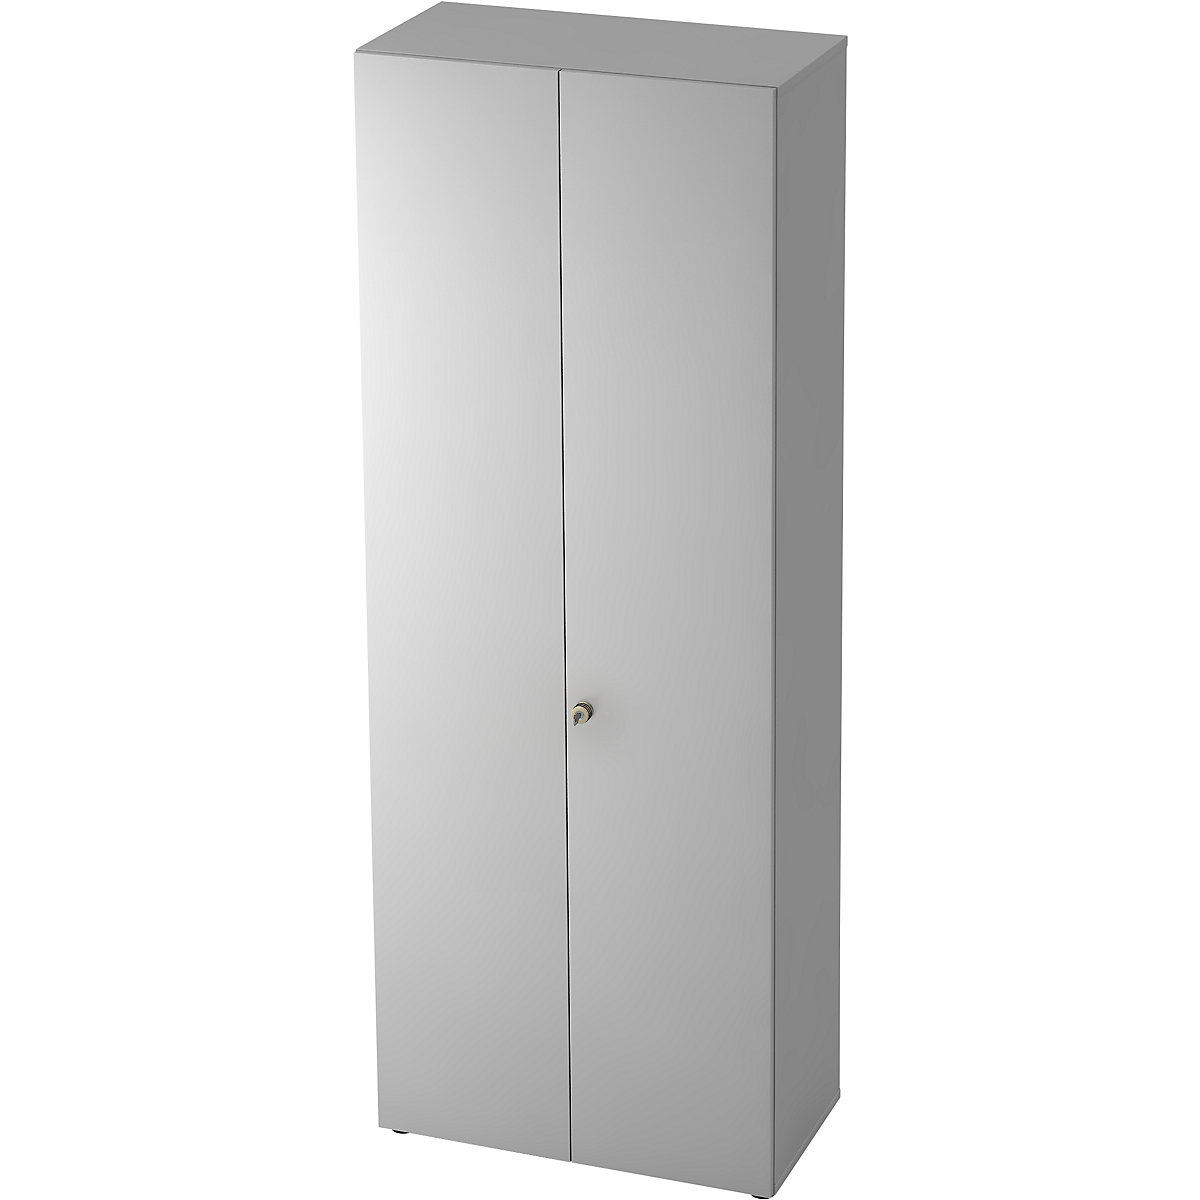 Filing cupboard with acoustic rear panel ANNY-AC